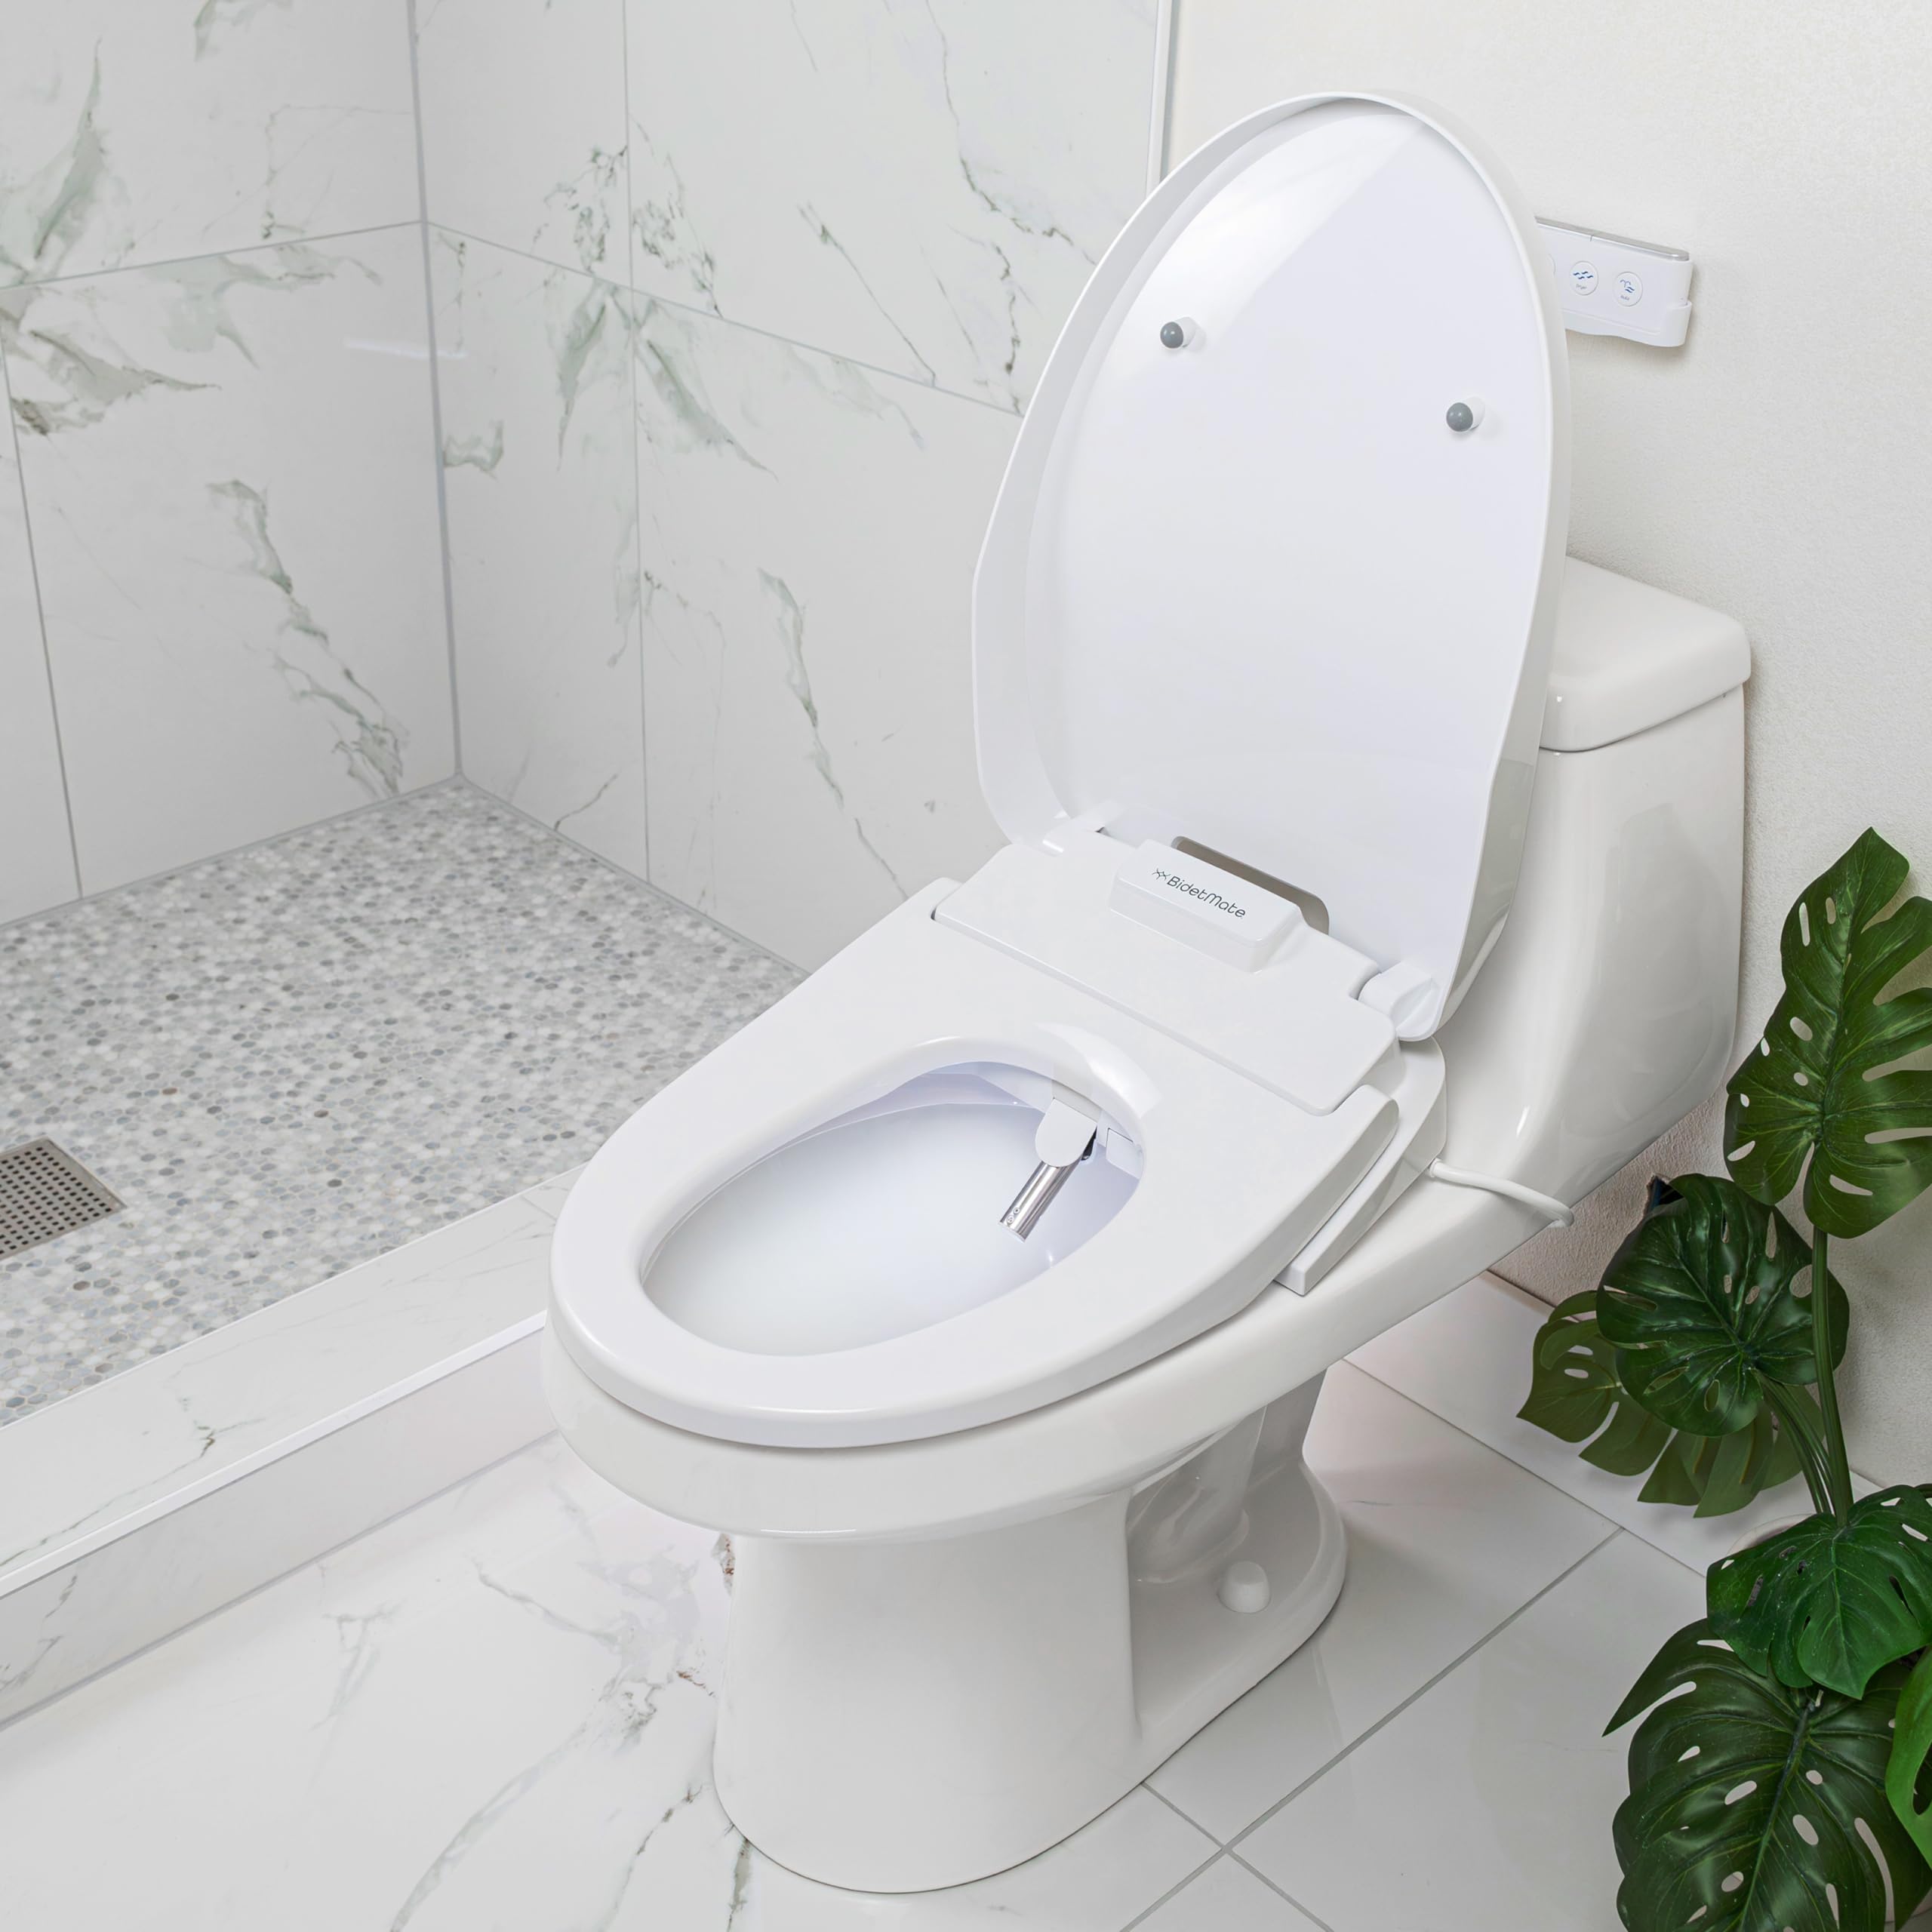 BidetMate 3500 Series Electric Bidet Heated Smart Toilet Seat with Automatic Opening and Closing Lid & Seat, Unlimited Heated Water, Remote, Warm Air Dryer, and Self-Cleaning - Fits Elongated Toilets